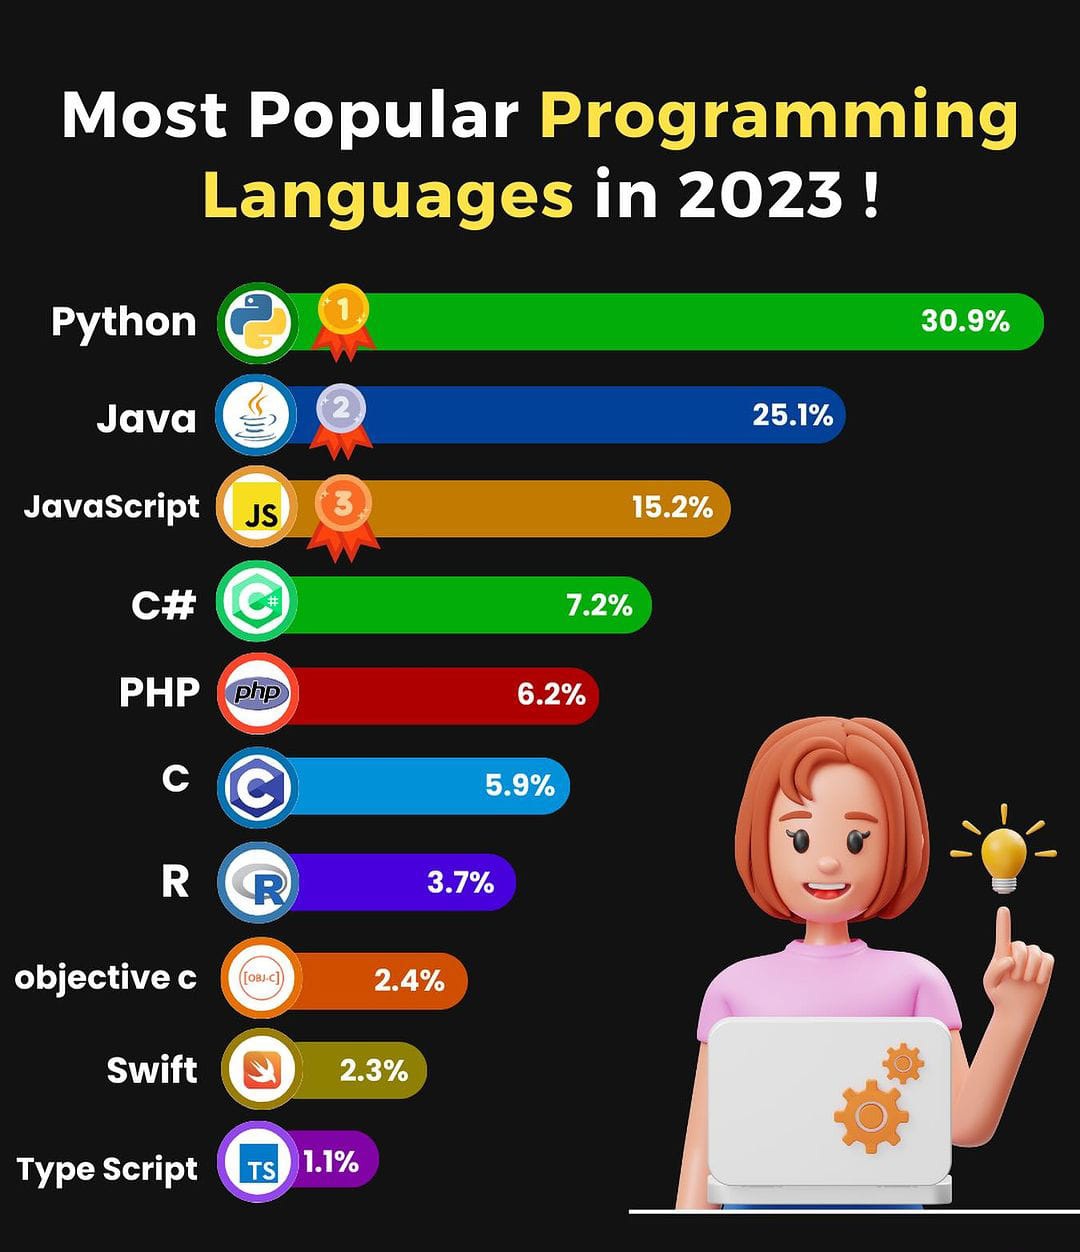 Most popular programming languages in 2023!